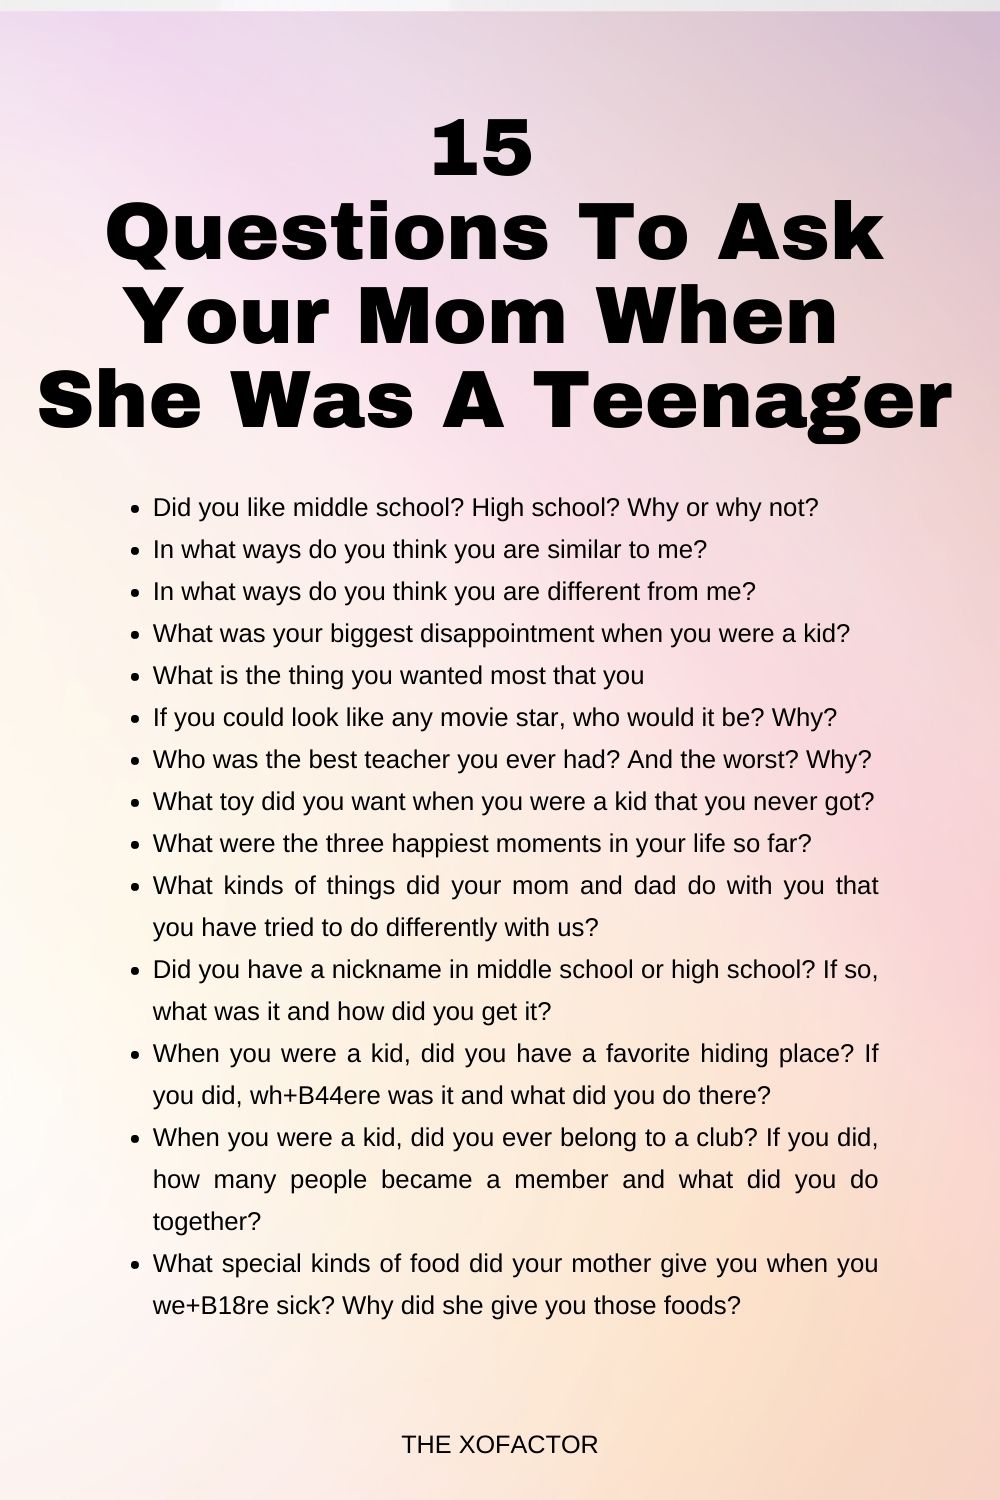 Questions To Ask Your Mom When She Was A Teenager